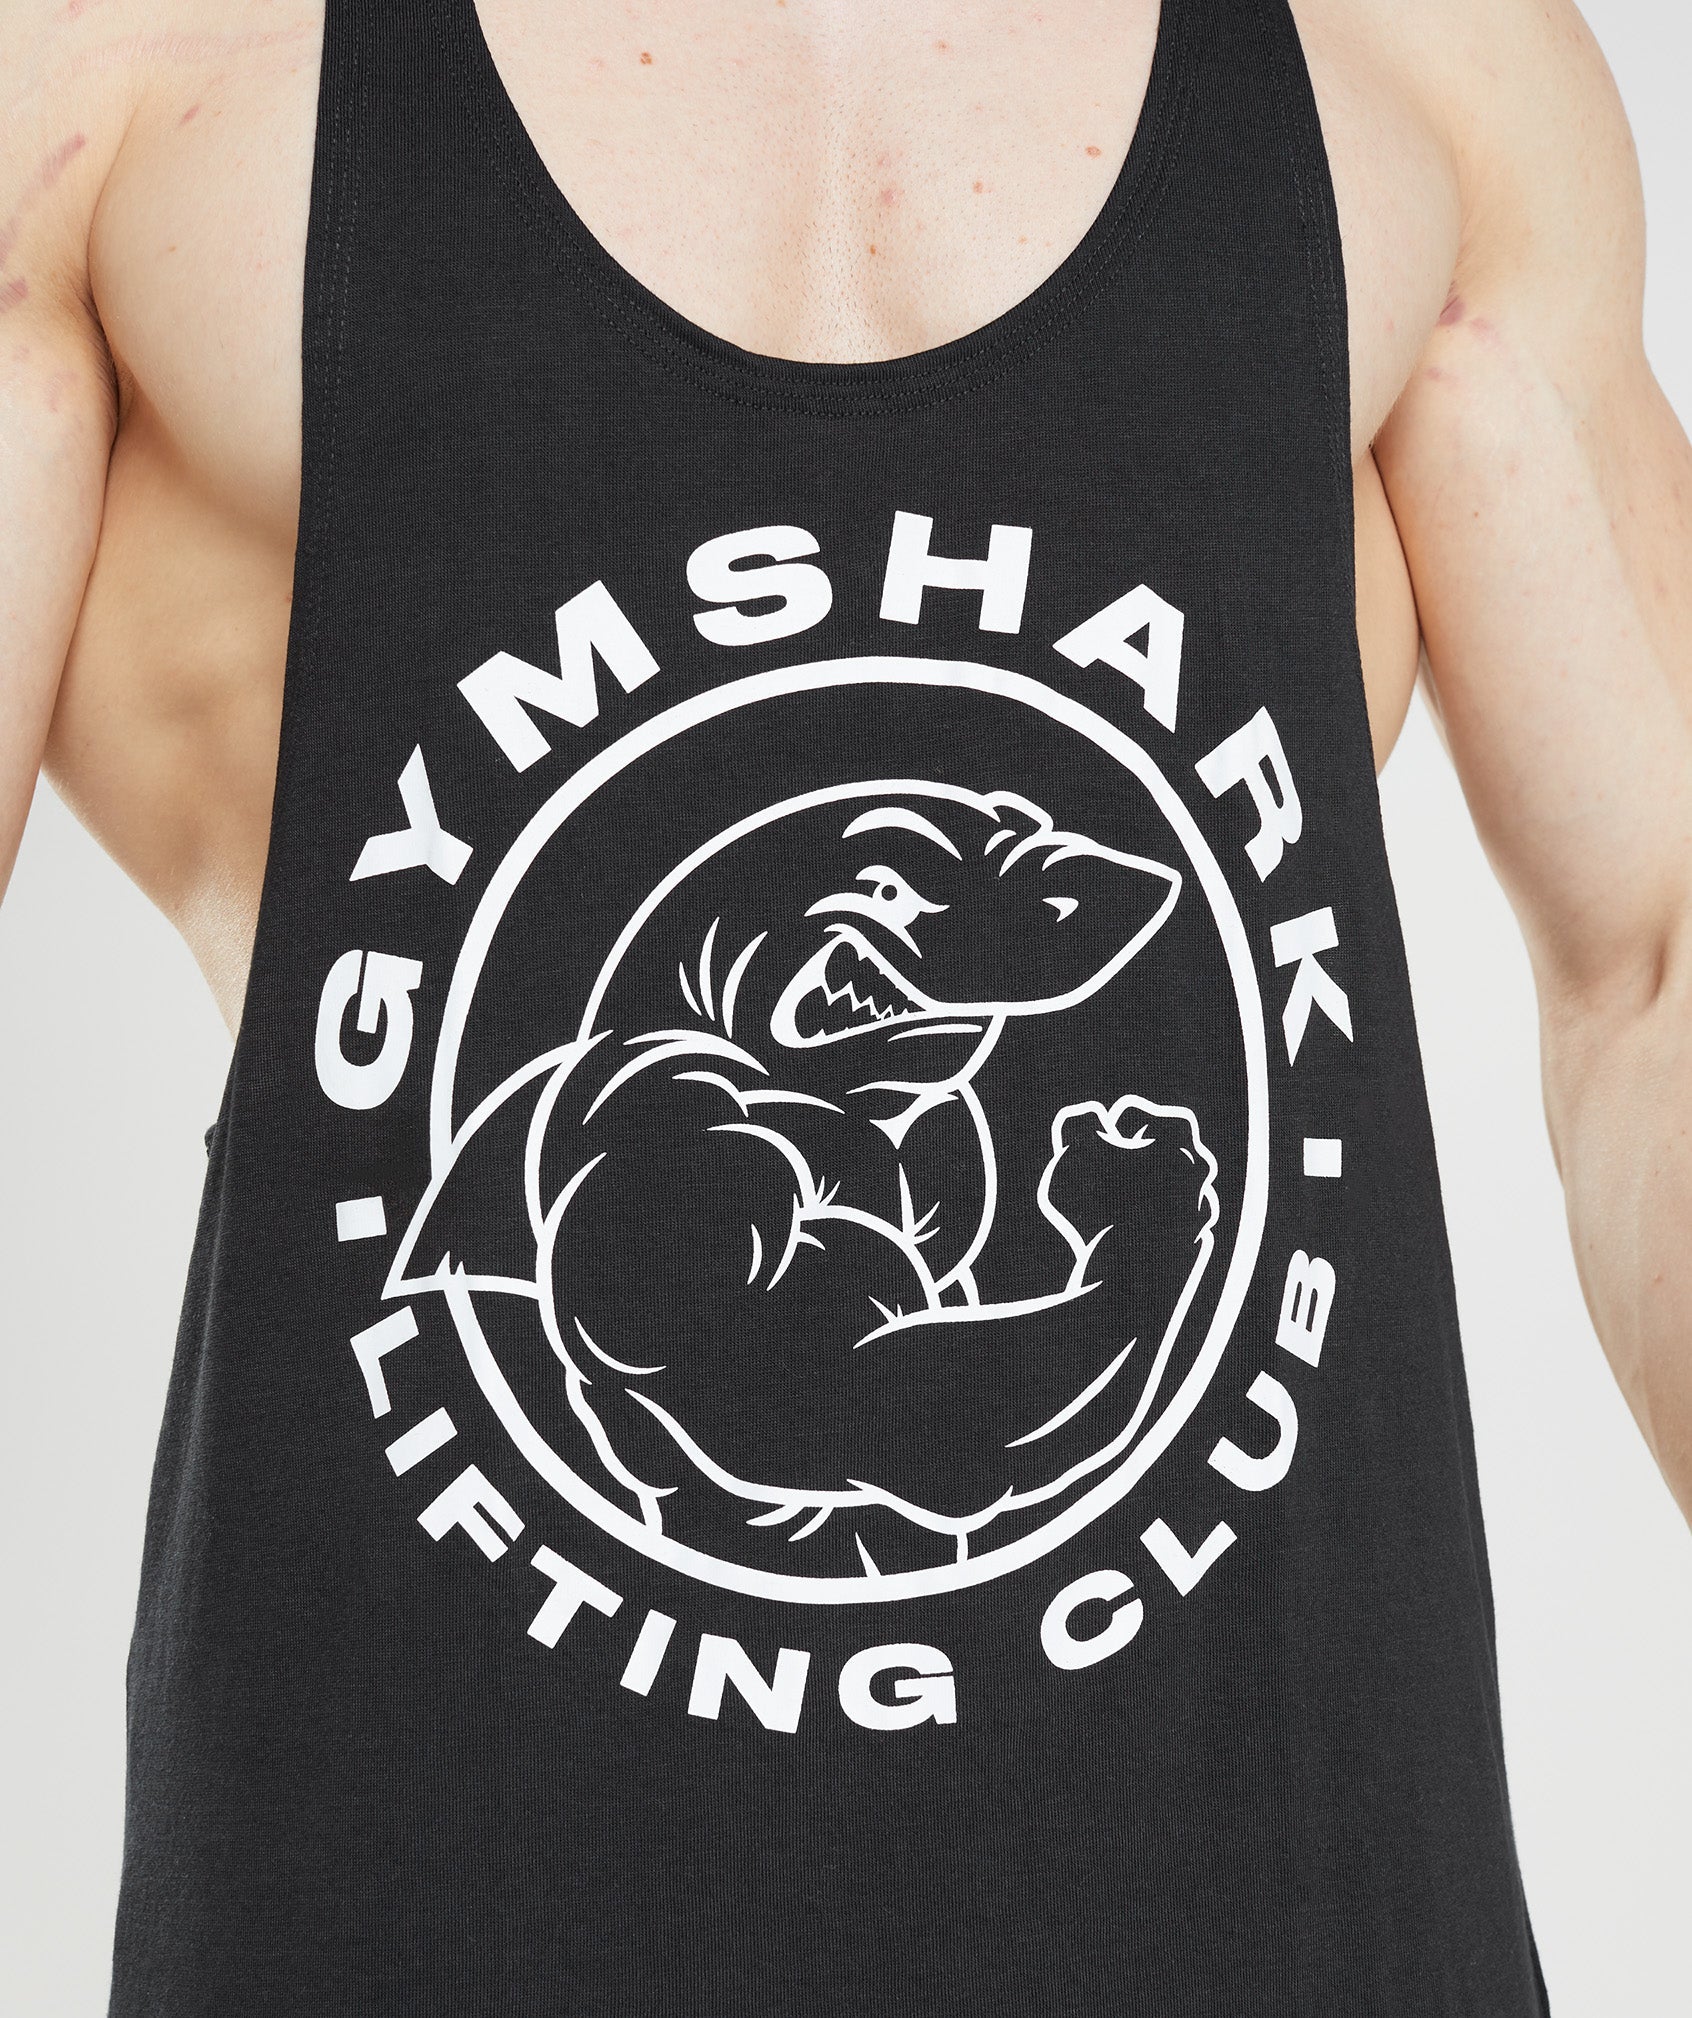 The Legacy Stringer. Wear and build your Legacy with pride. #Gymshark #Gym  #Sweat #Train #Perform #Seamless #Exercise …